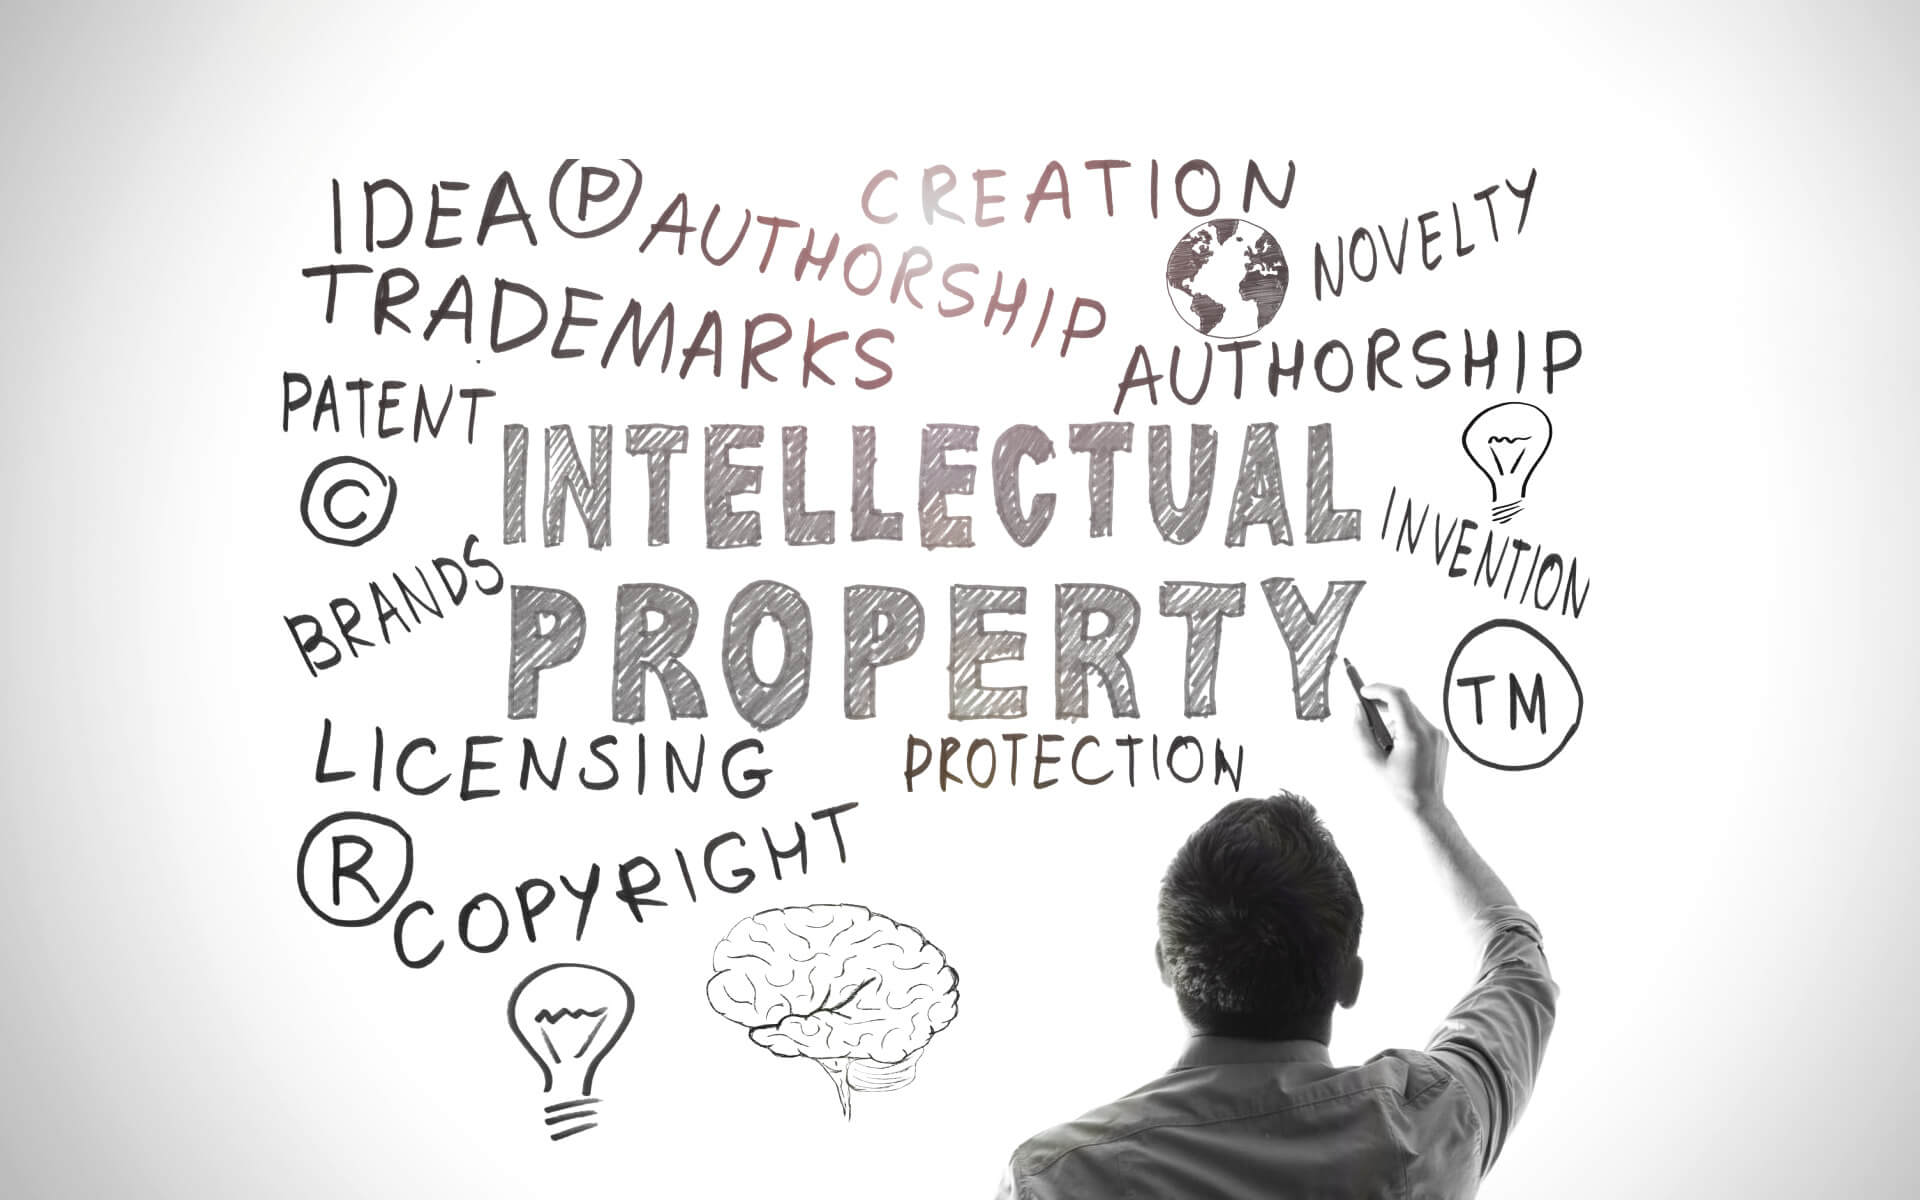 assignment of intellectual property rights means